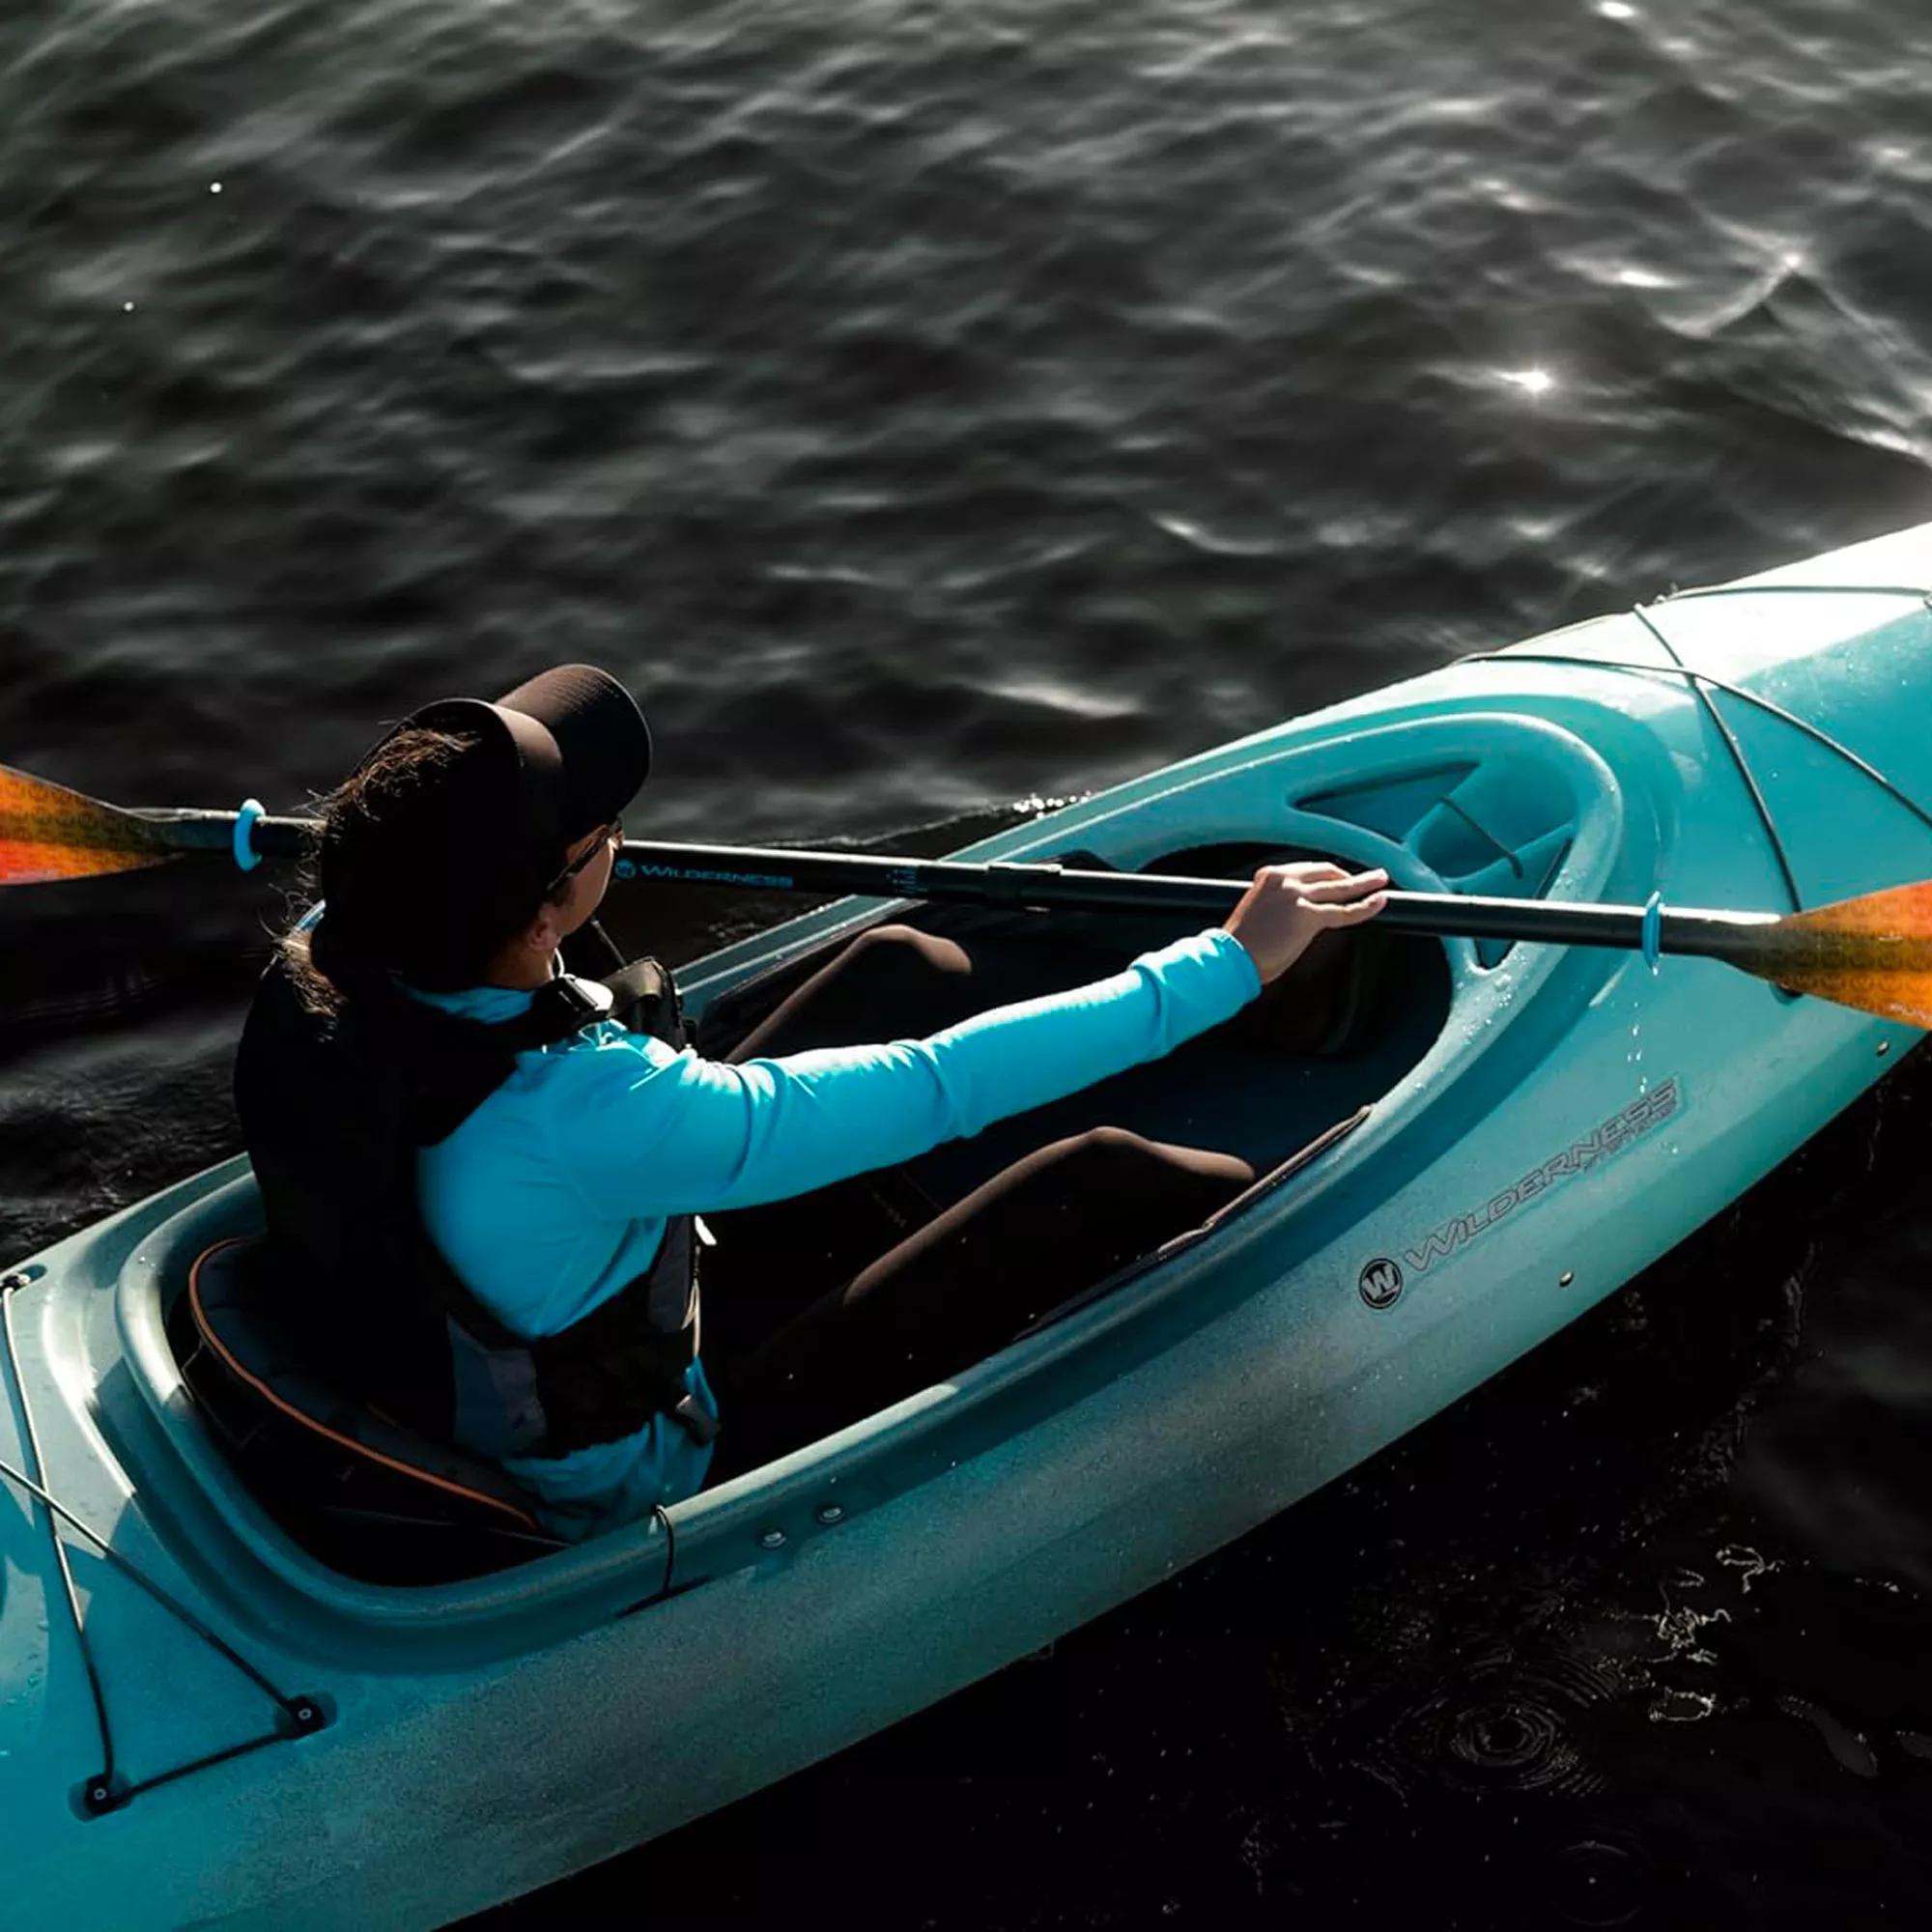 WILDERNESS SYSTEMS - Aspire 105 Recreational Kayak - Discontinued color/model - Blue - 9730325110 - LIFE STYLE 2